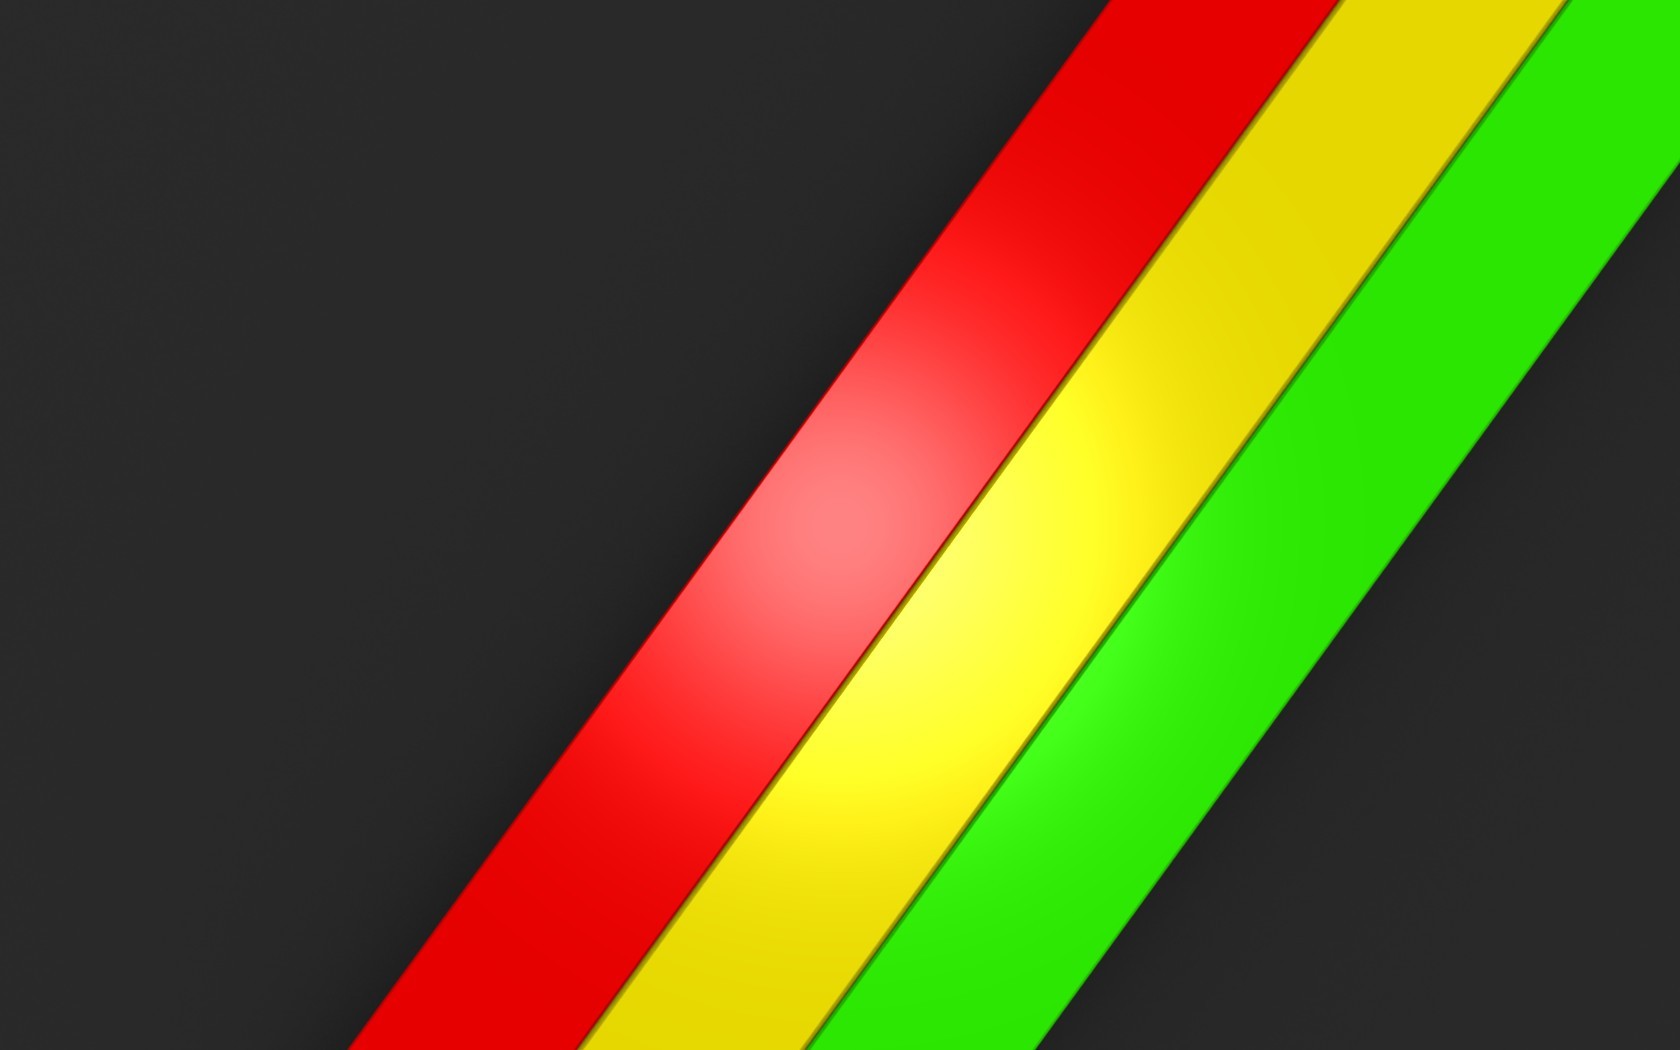 General 1680x1050 colorful black red yellow green lines